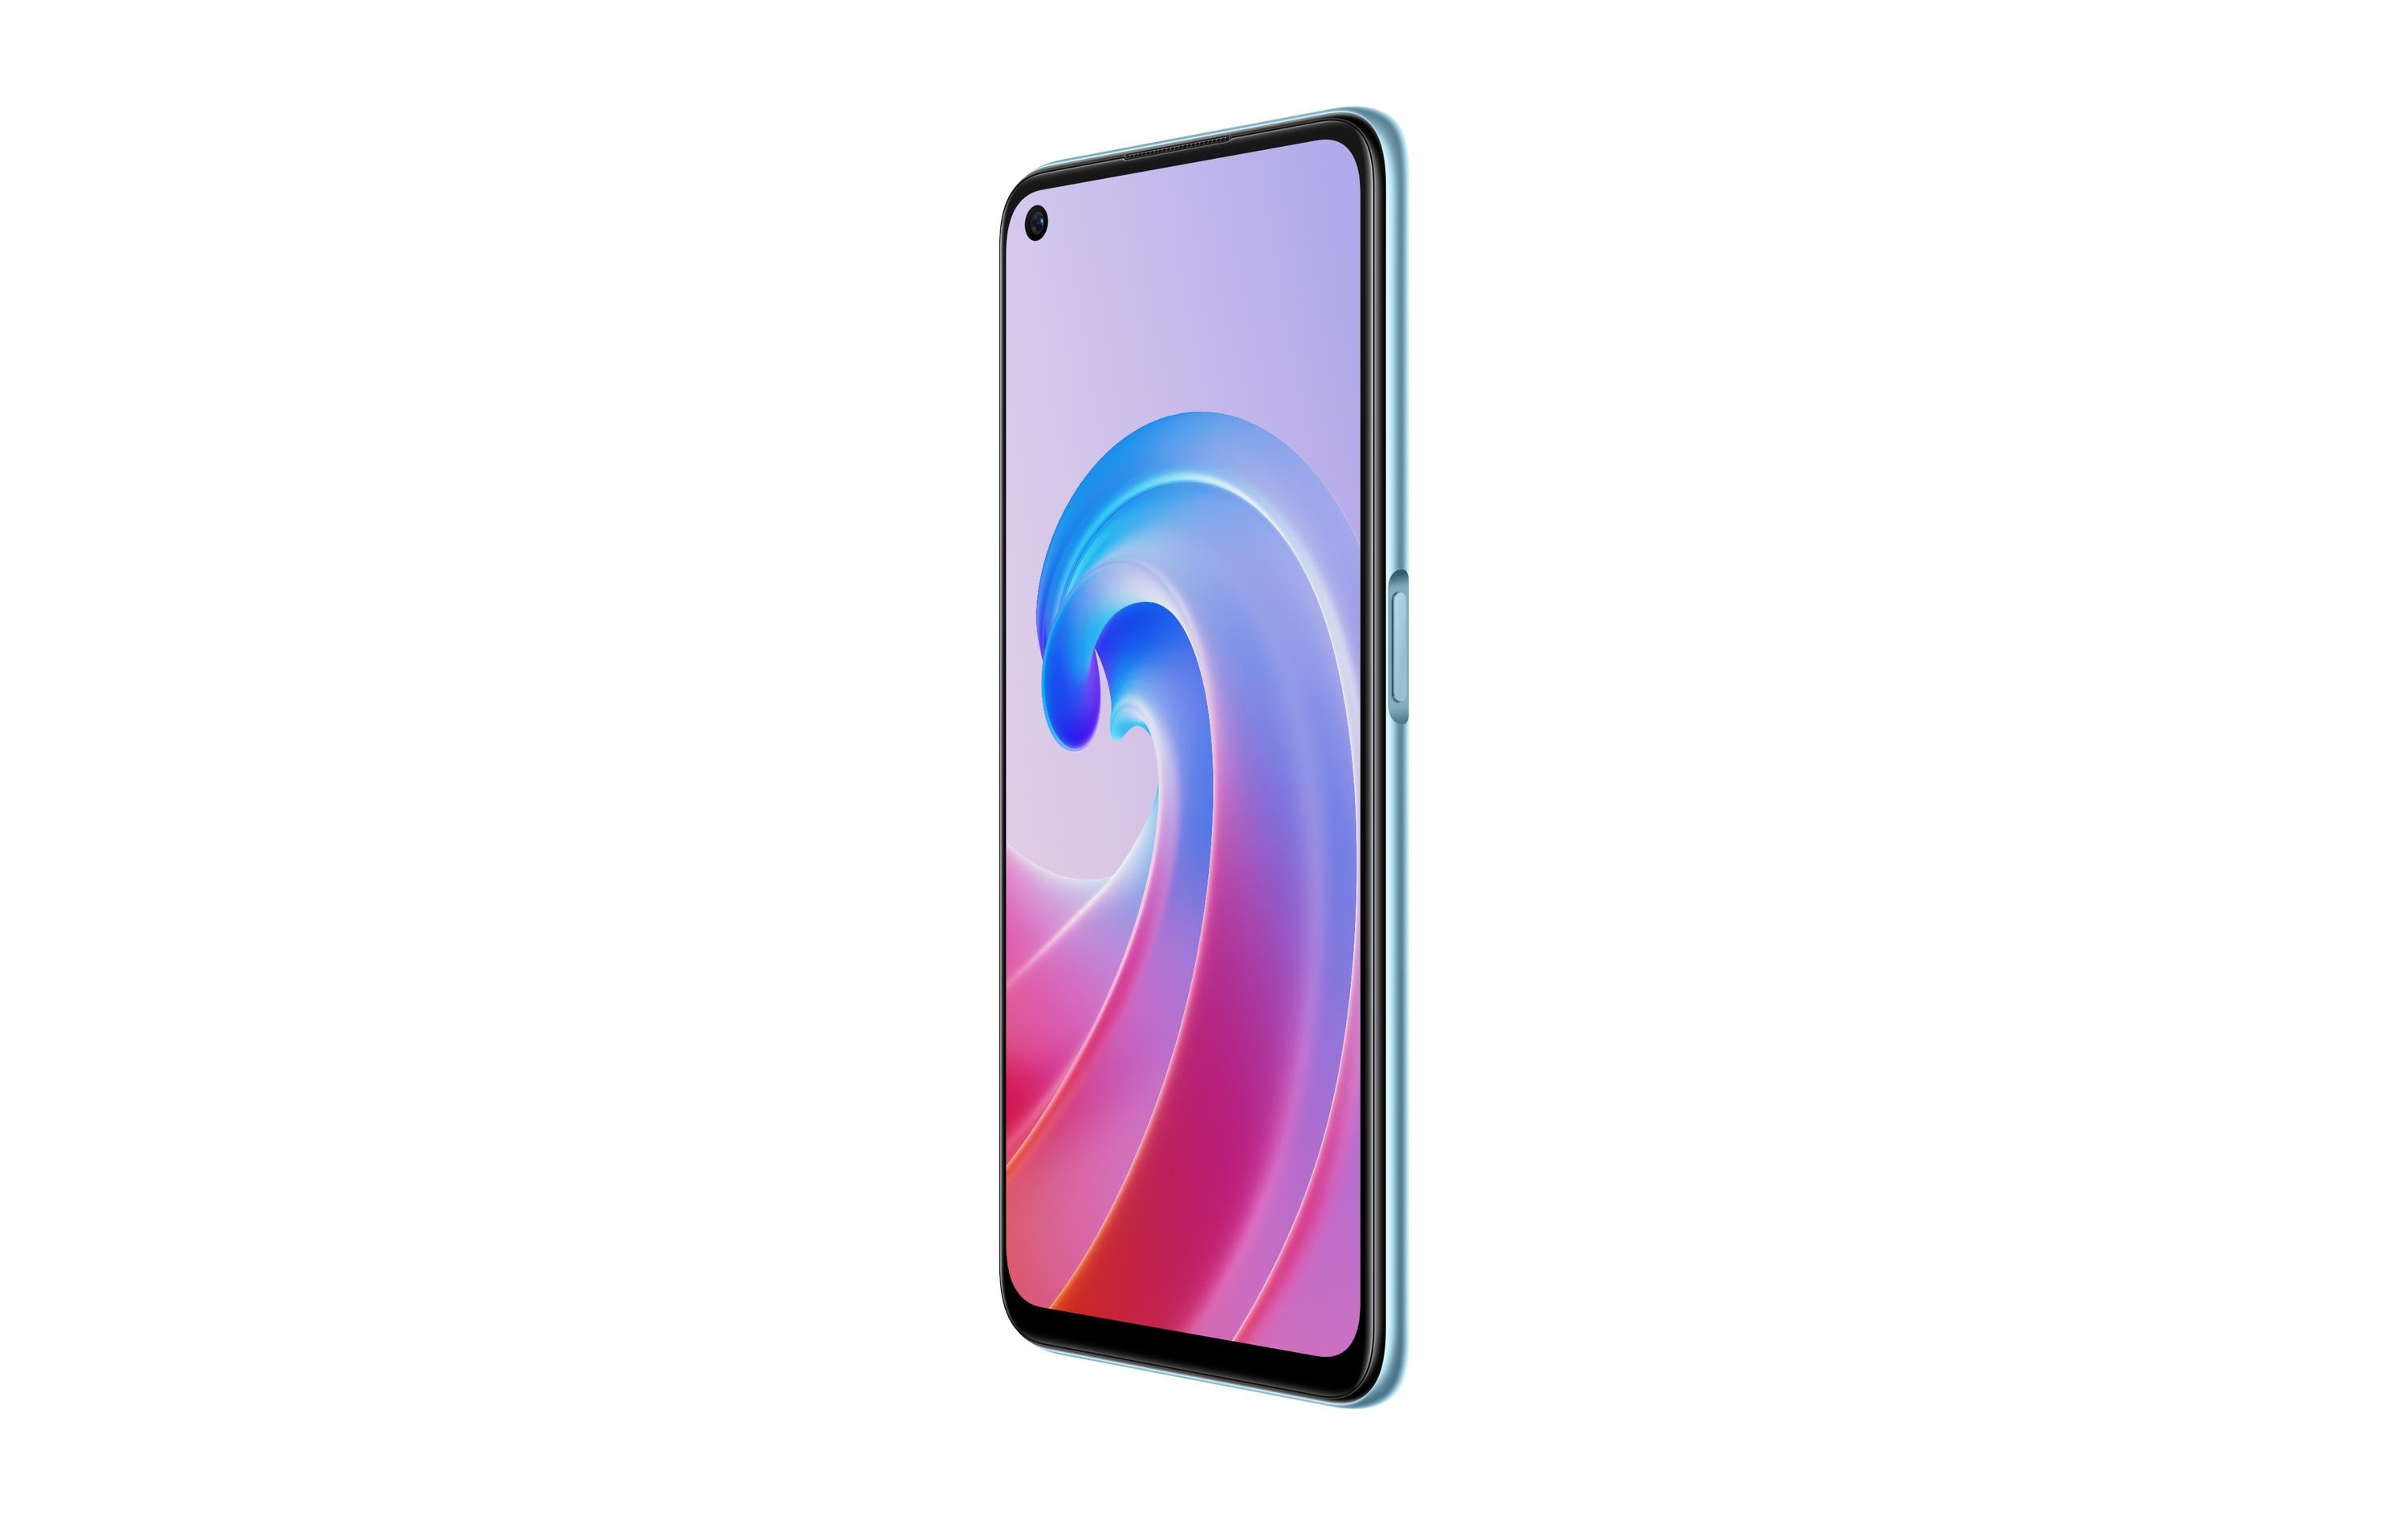 OPPO A96 128 GB Sunset Blue